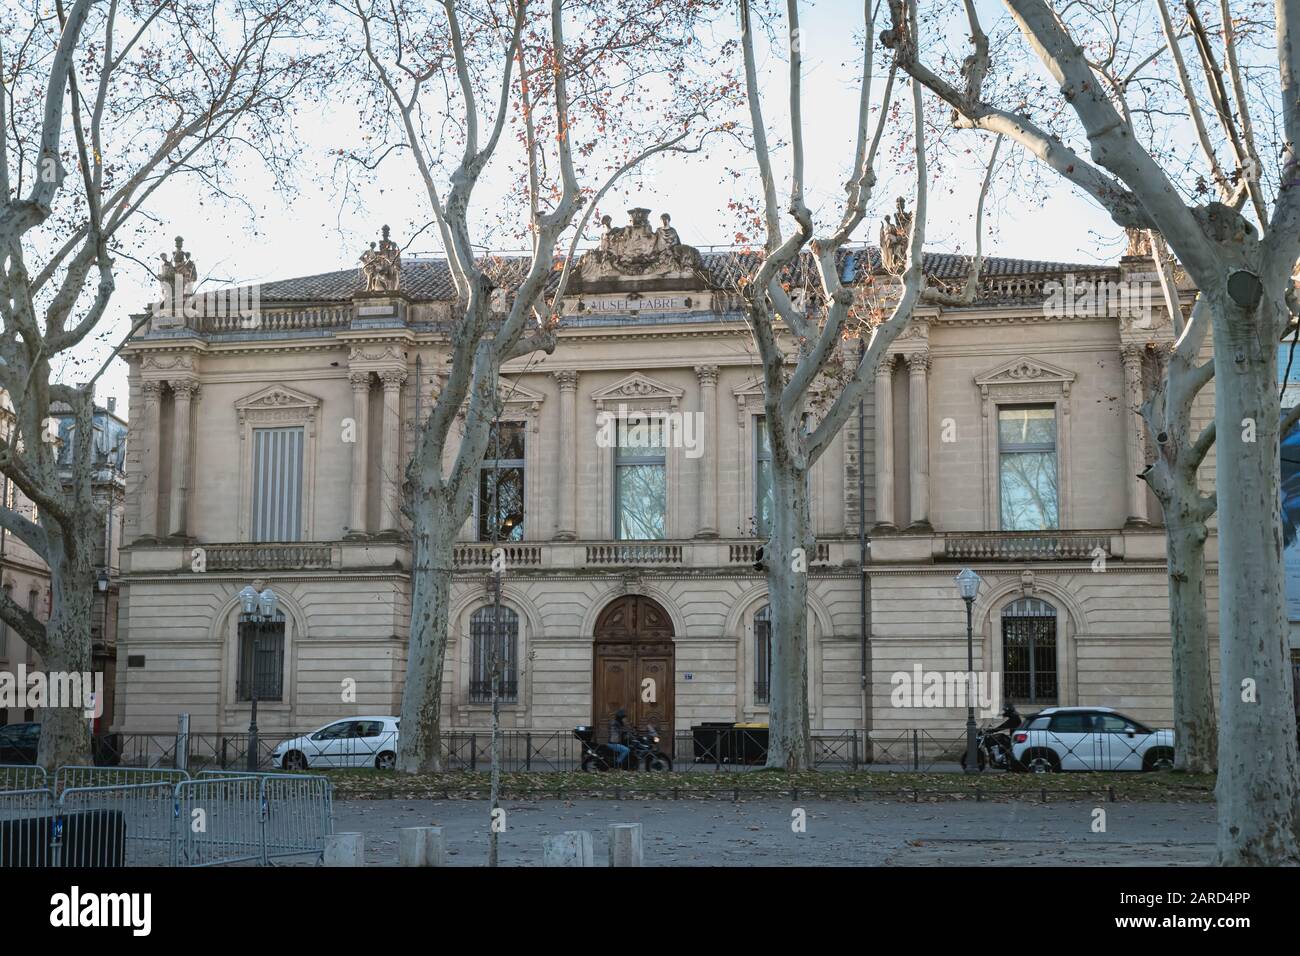 Montpellier, France - January 2, 2019: architectural detail of the Fabre museum next to the Place de la Comedie where people pass on a winter day Stock Photo